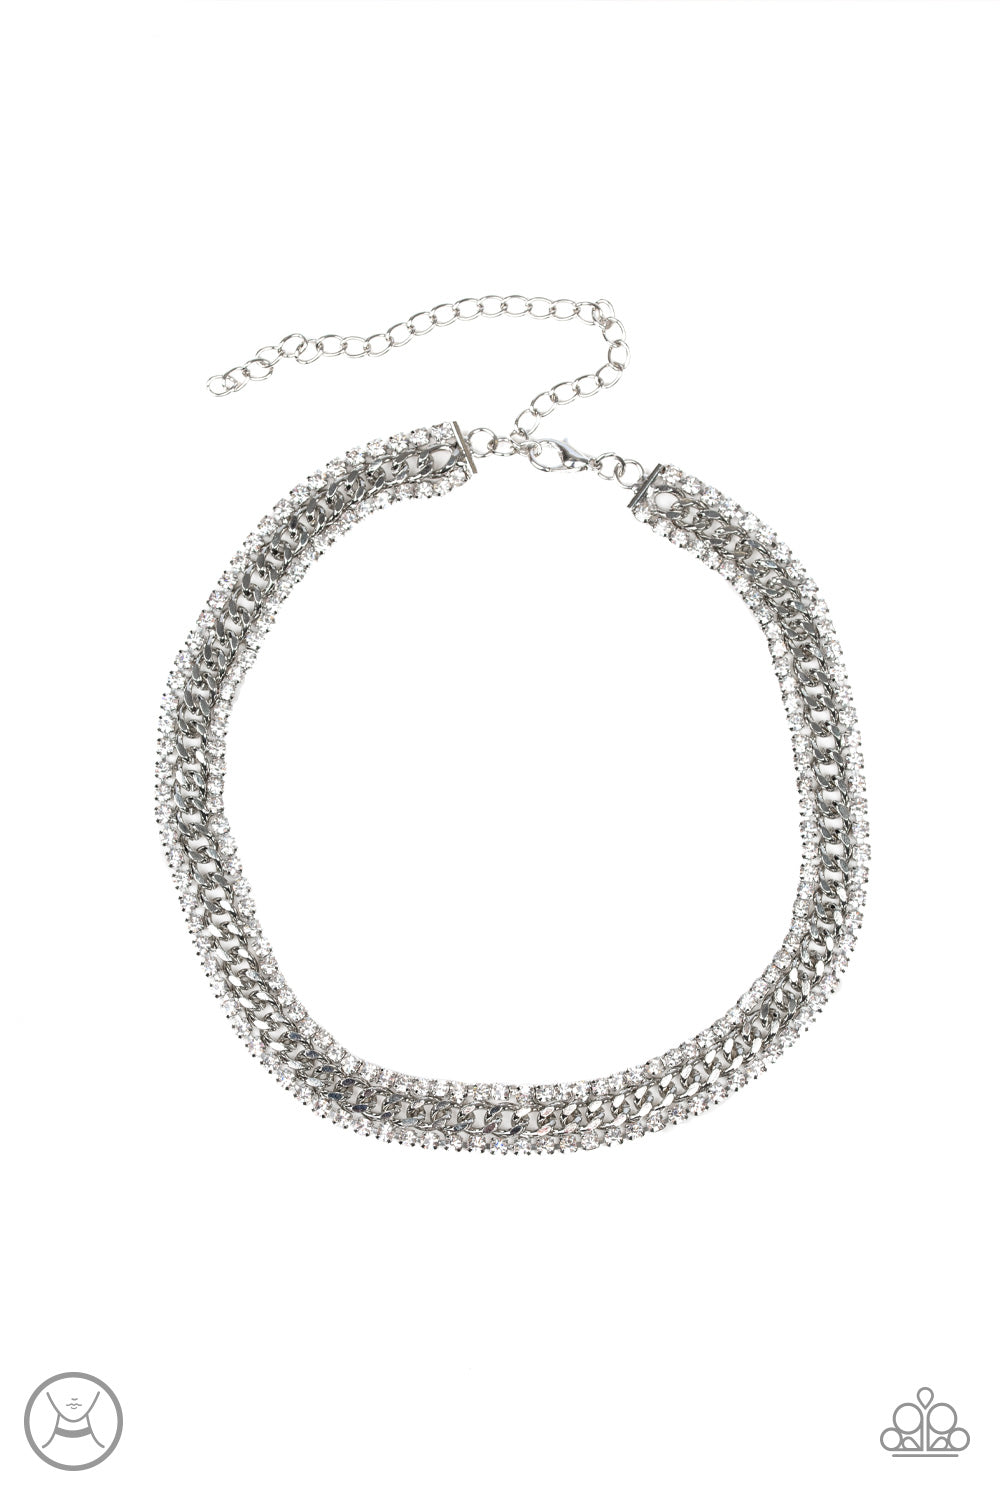 Empo-HER-ment Silver Necklace